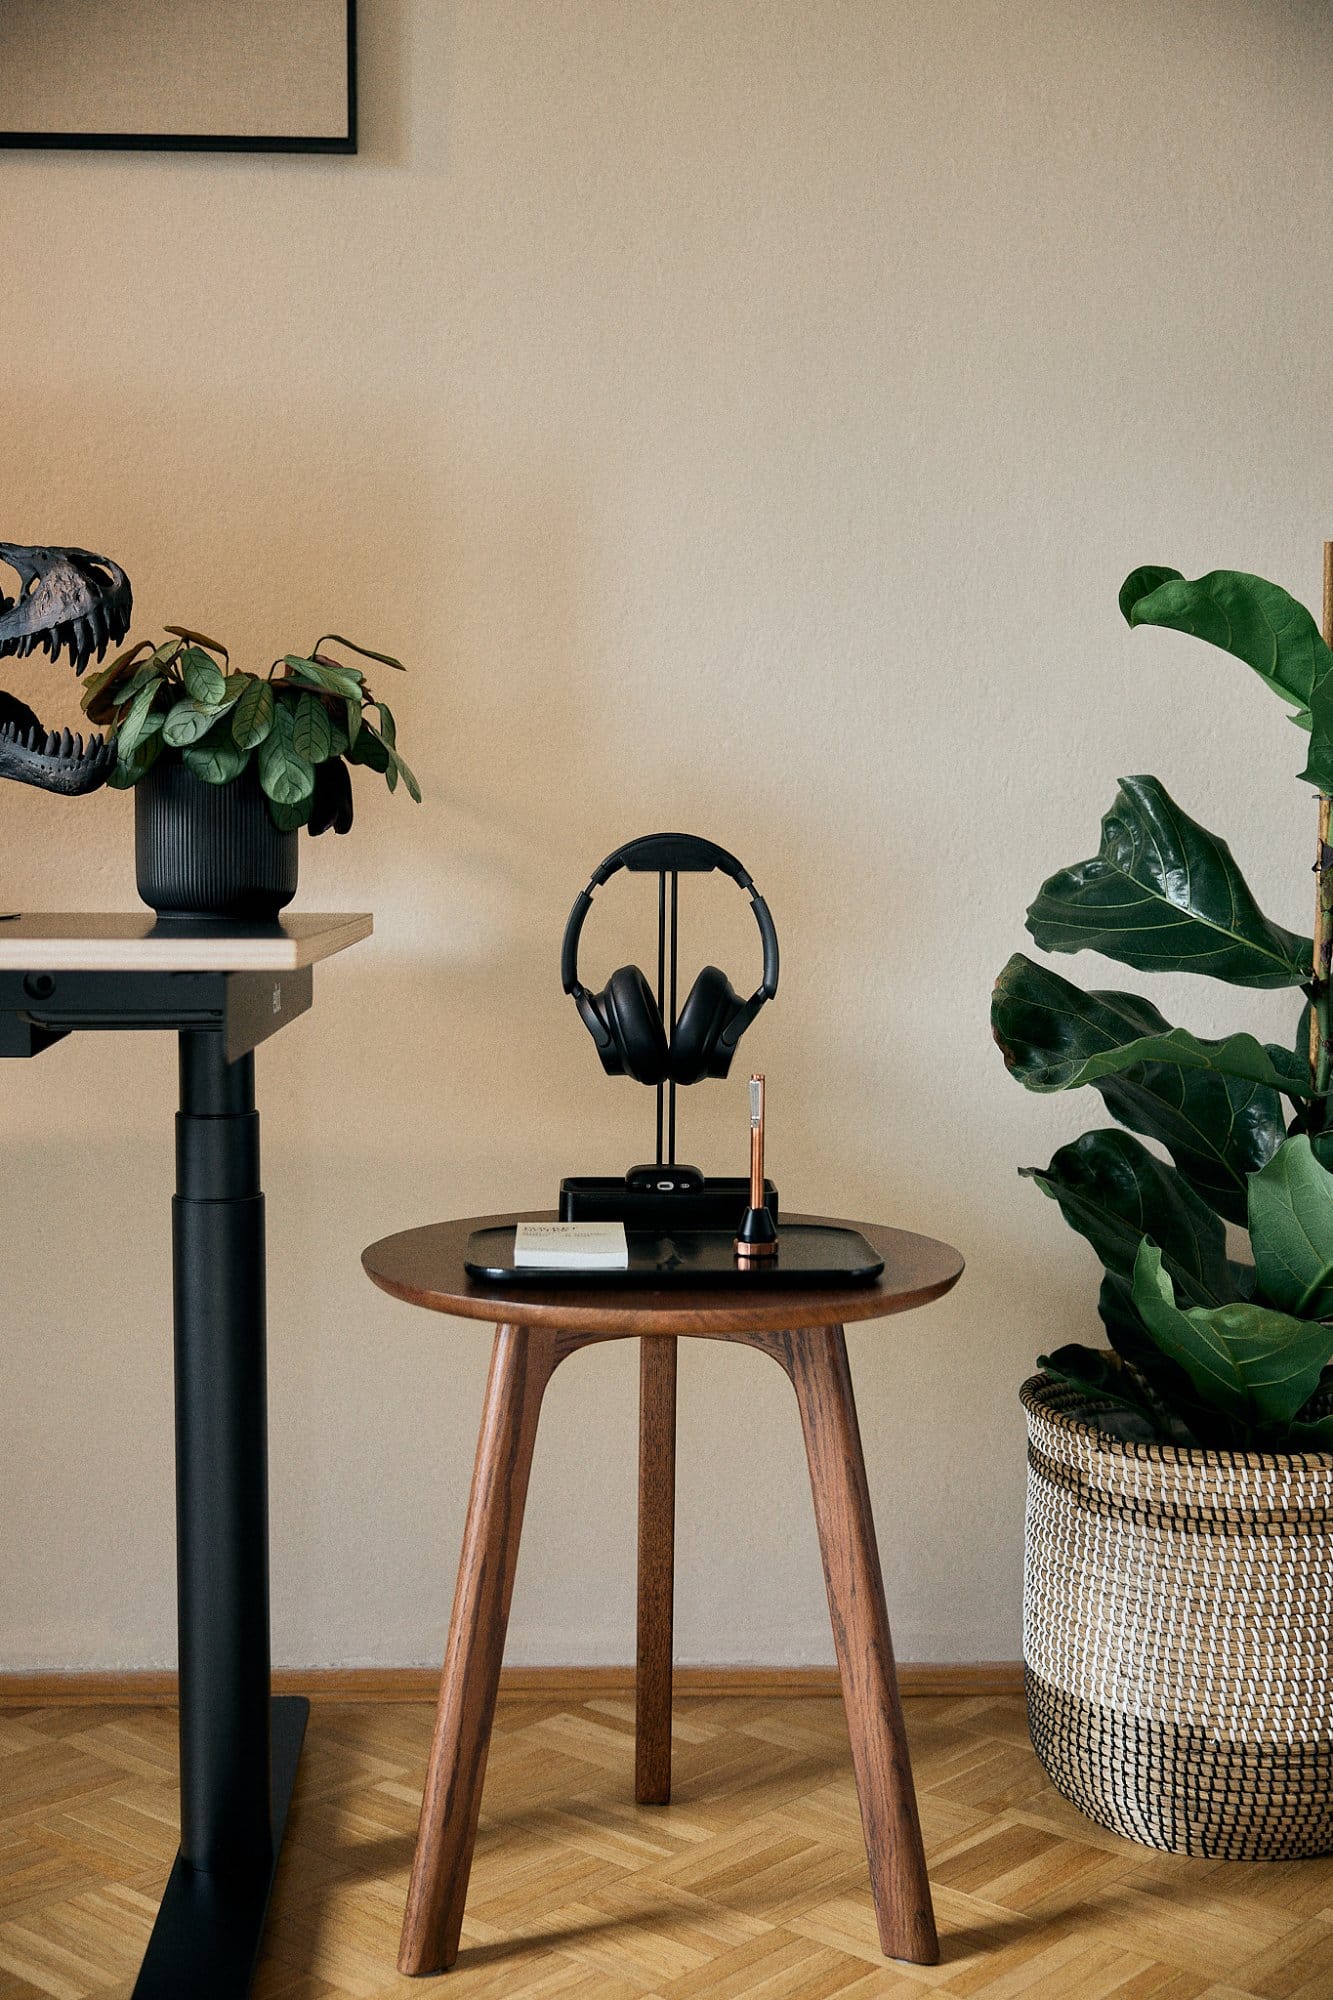 A minimalist corner with a small wooden table holding headphones, a smartphone charging on a dock, and a pen, beside a standing desk with a dinosaur skull model and a large leafy potted plant in a woven basket